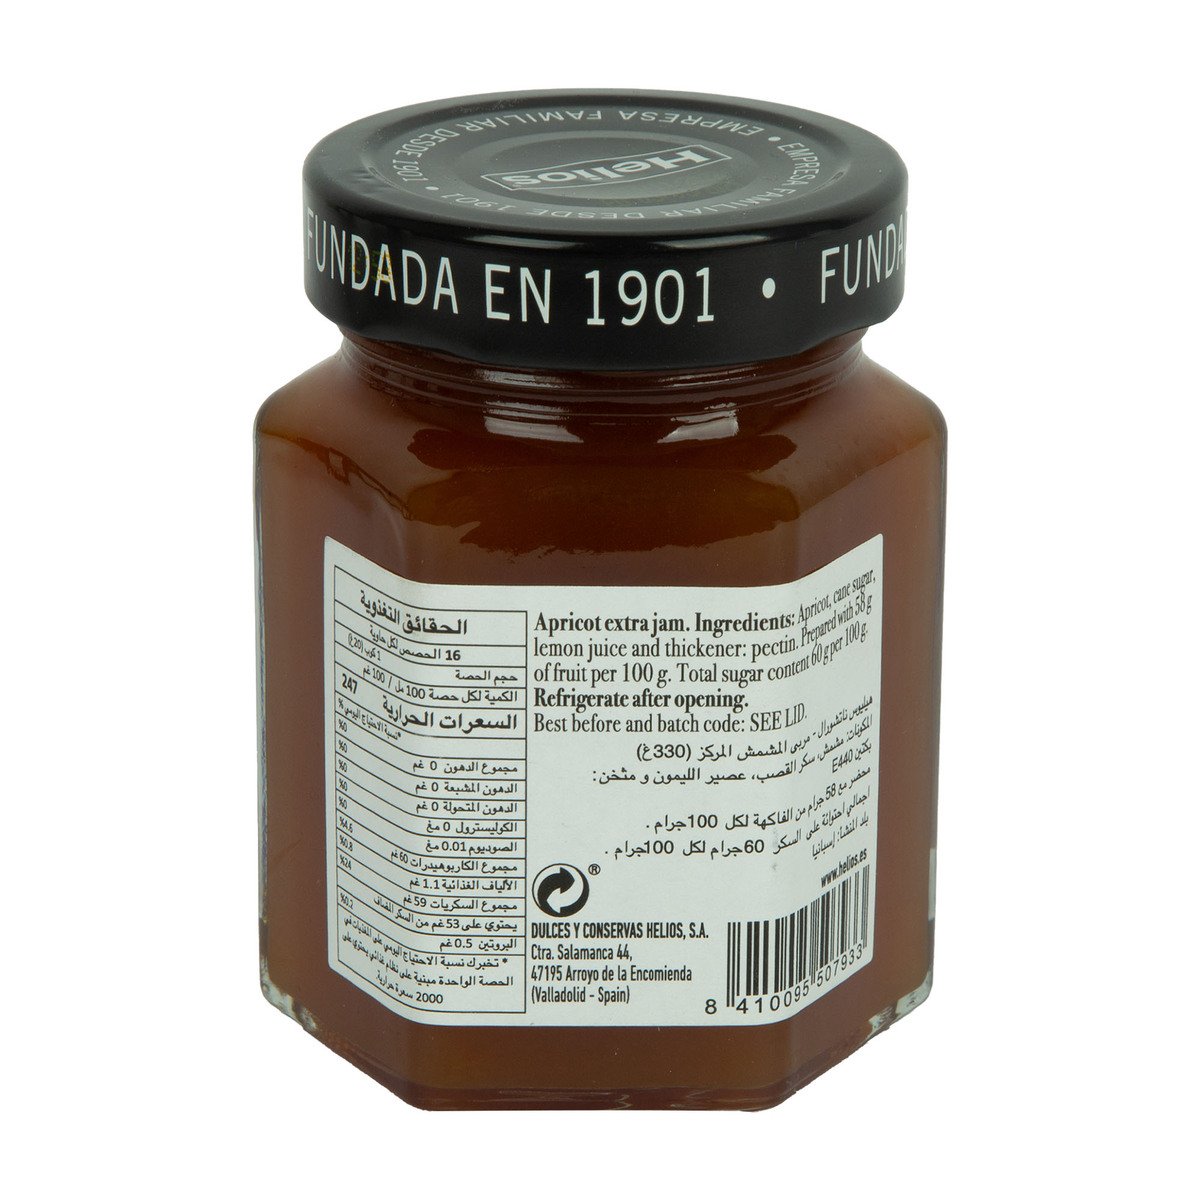 Helios Apricot Natural Jam 330 g